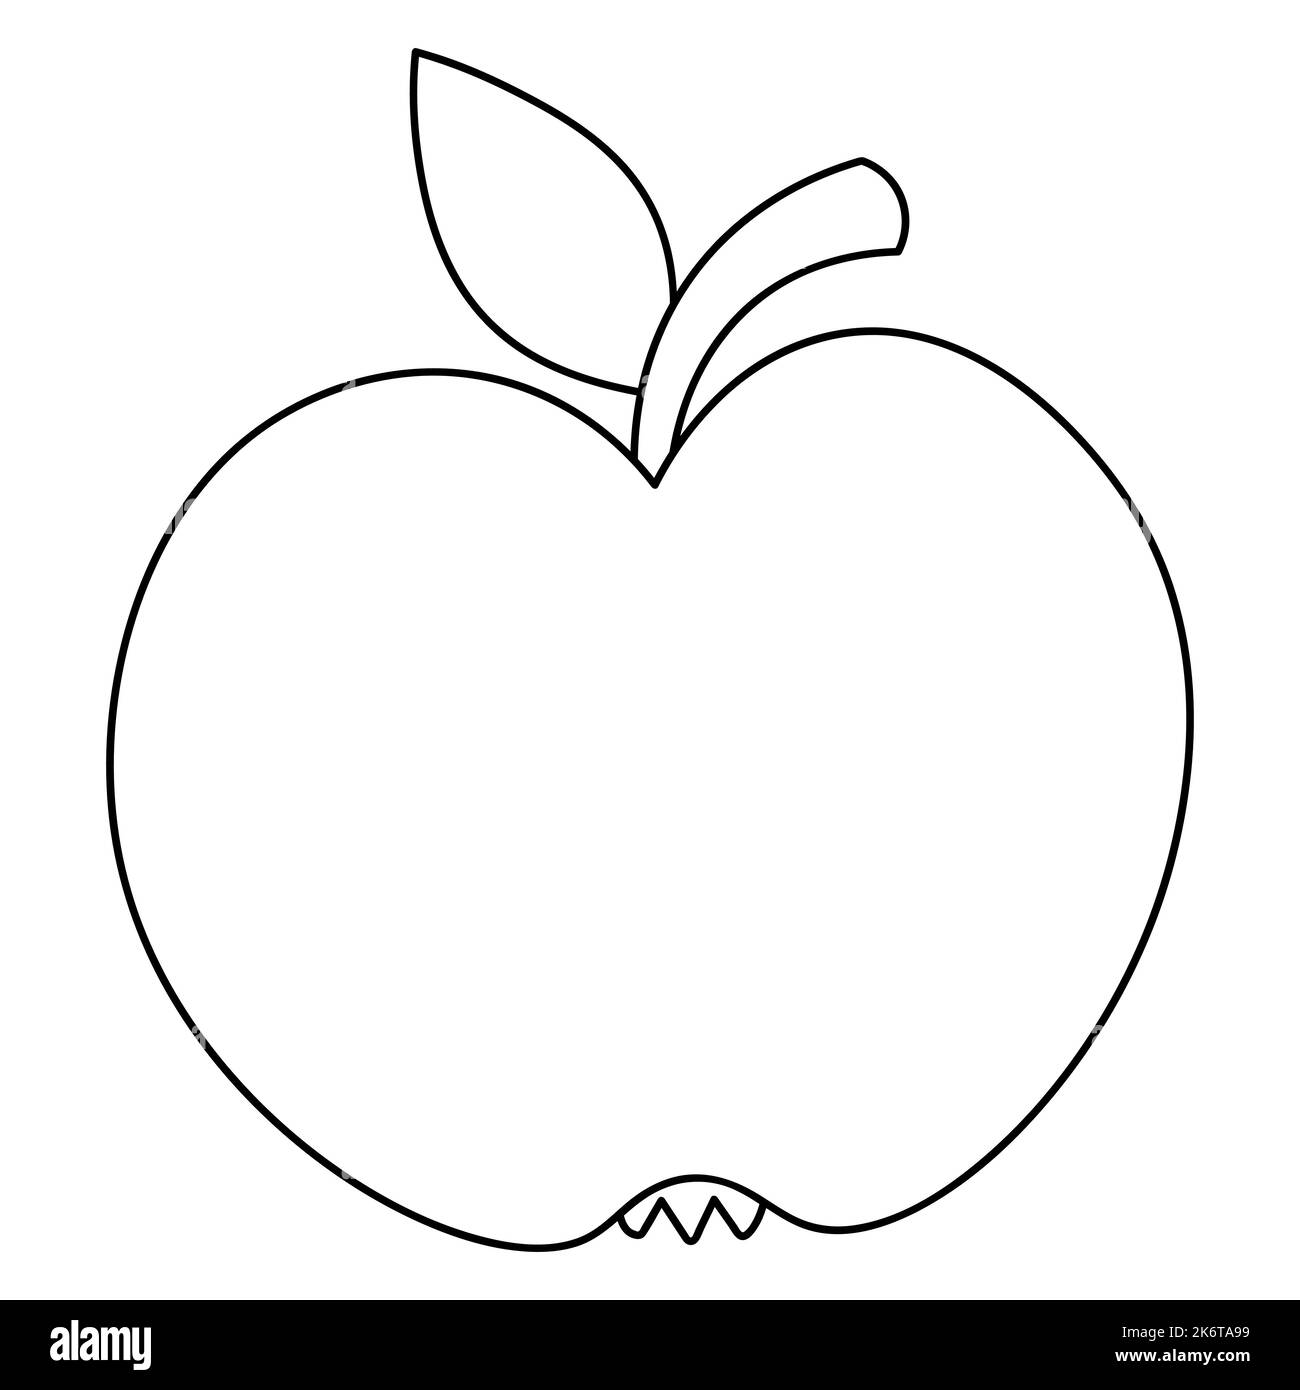 Apple. Delicious fruit with a leaf. Vector illustration. Outline on an isolated white background. Doodle style. Sketch. Coloring book. Juicy fruit Stock Vector